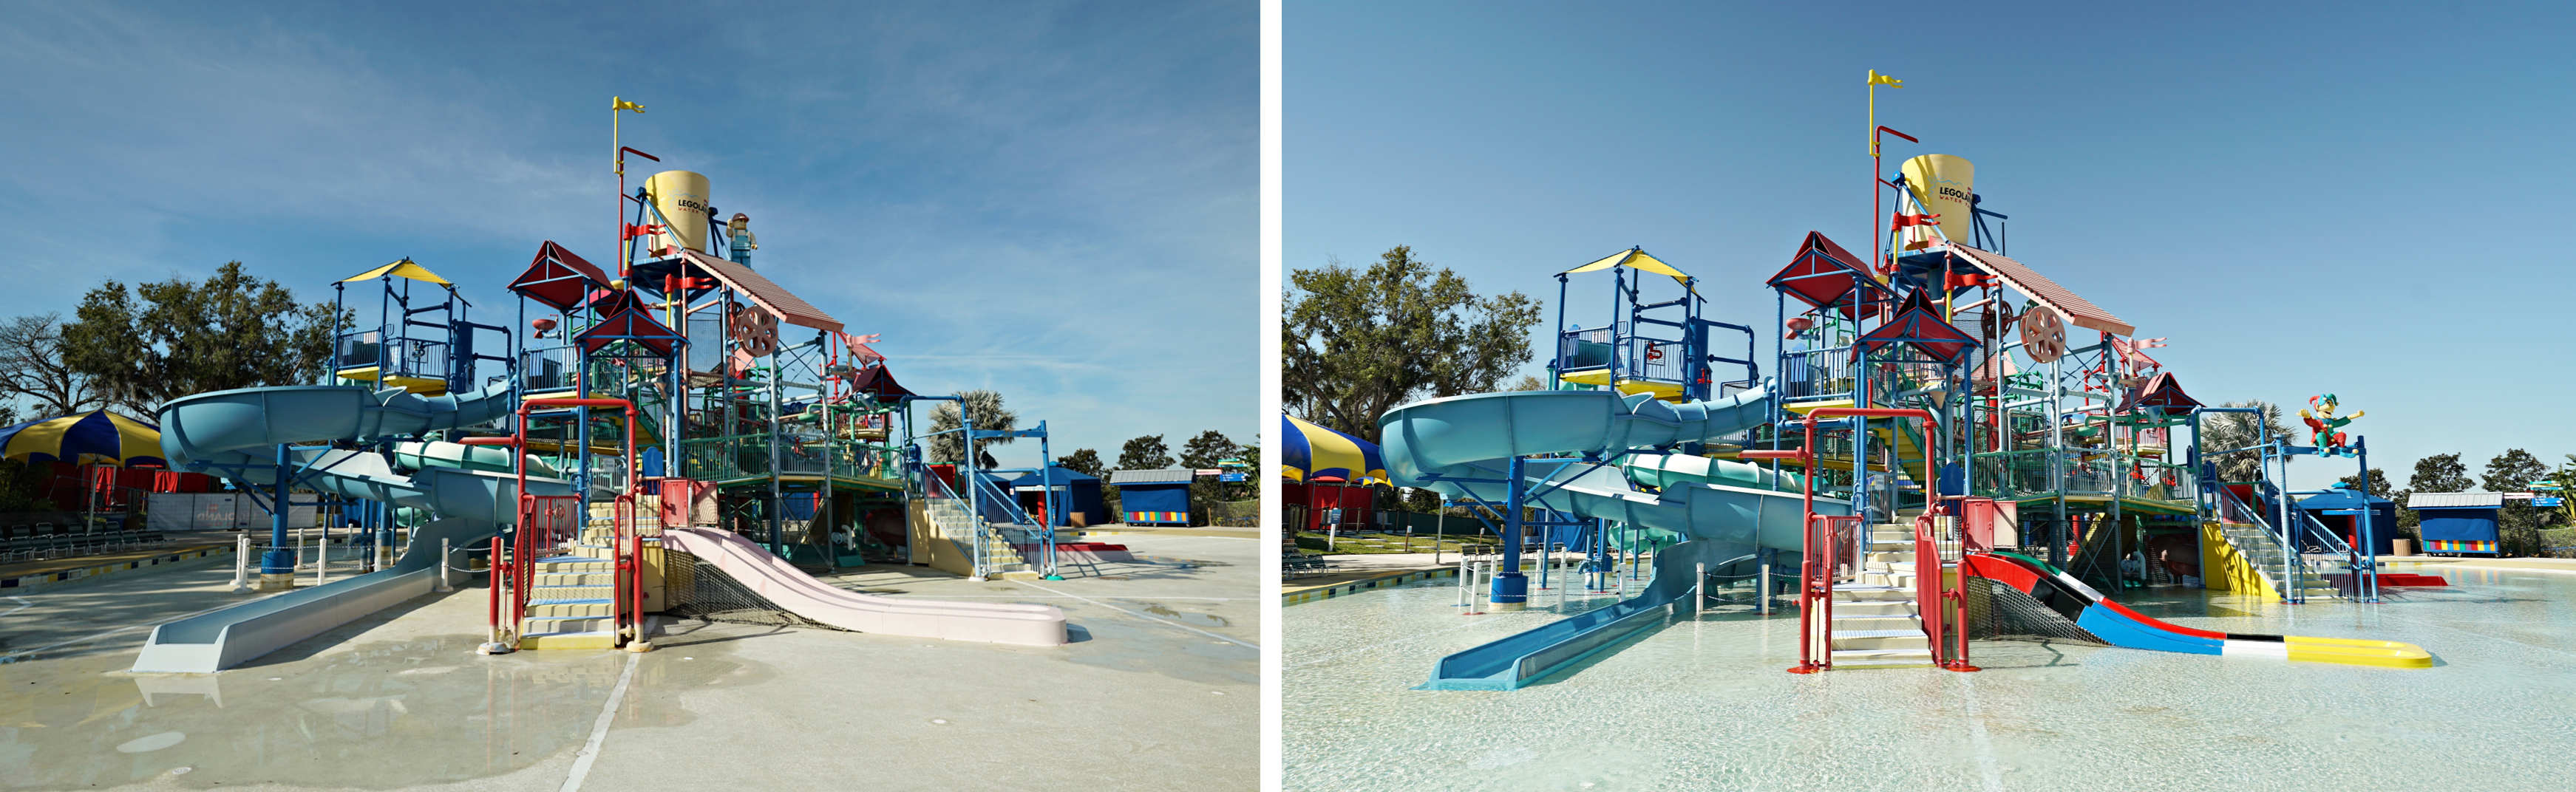 Aquatic play structure before and after slide refurbishment